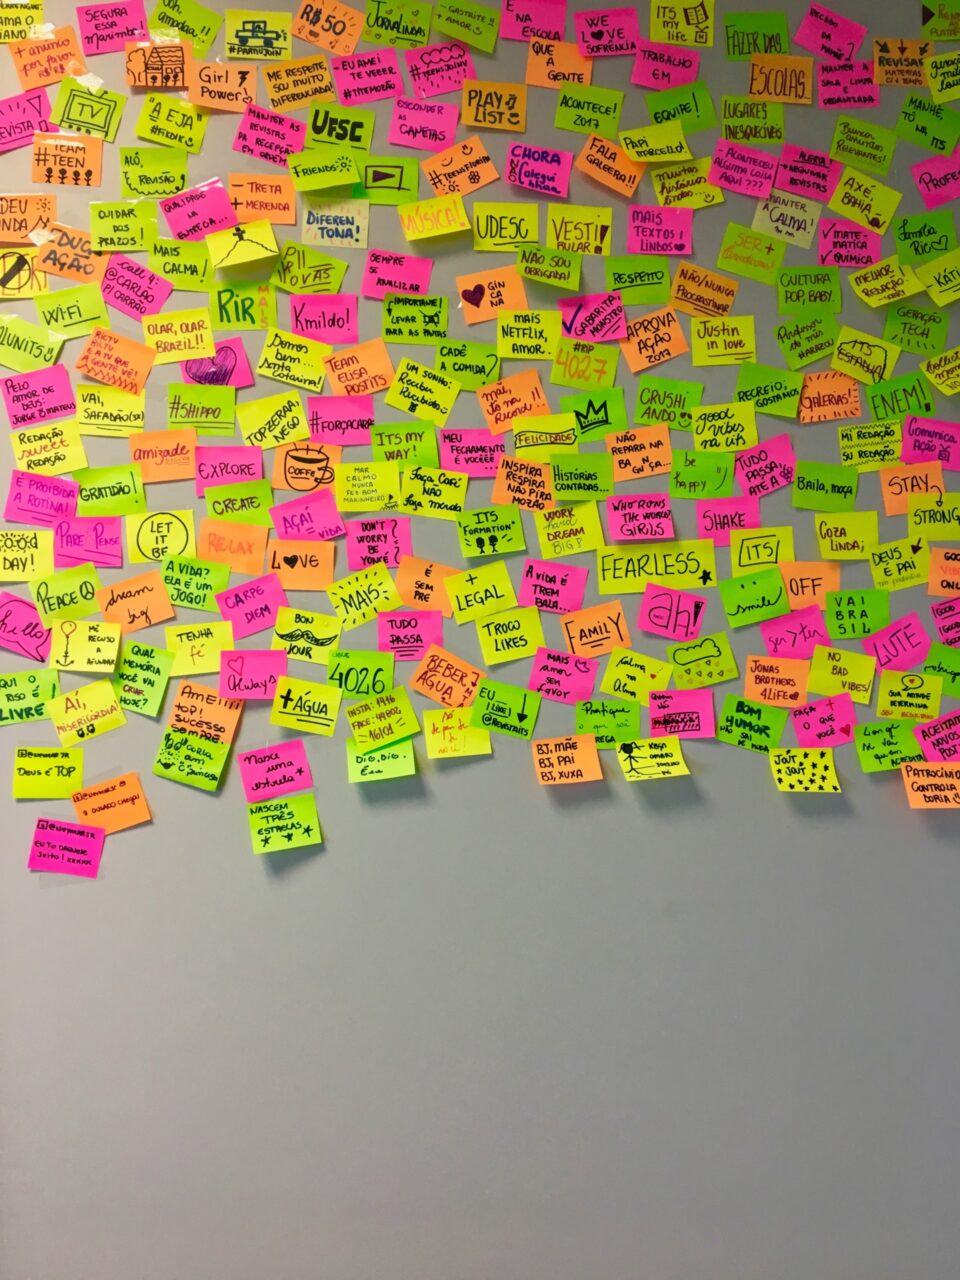 Post it notes